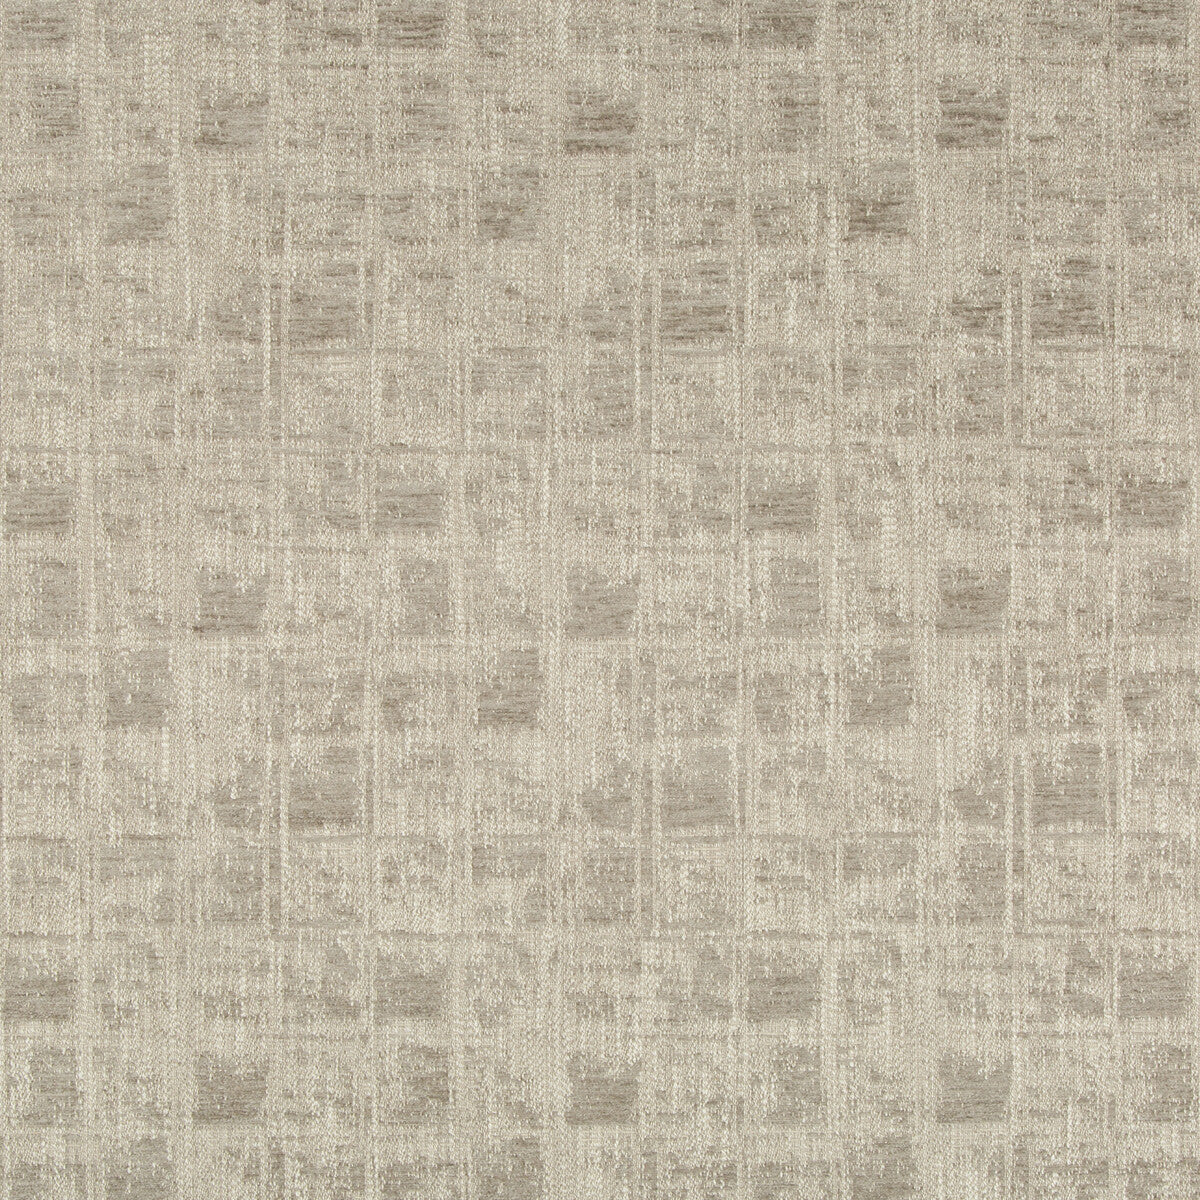 Sumi fabric in platinum color - pattern 35423.11.0 - by Kravet Couture in the Izu Collection collection